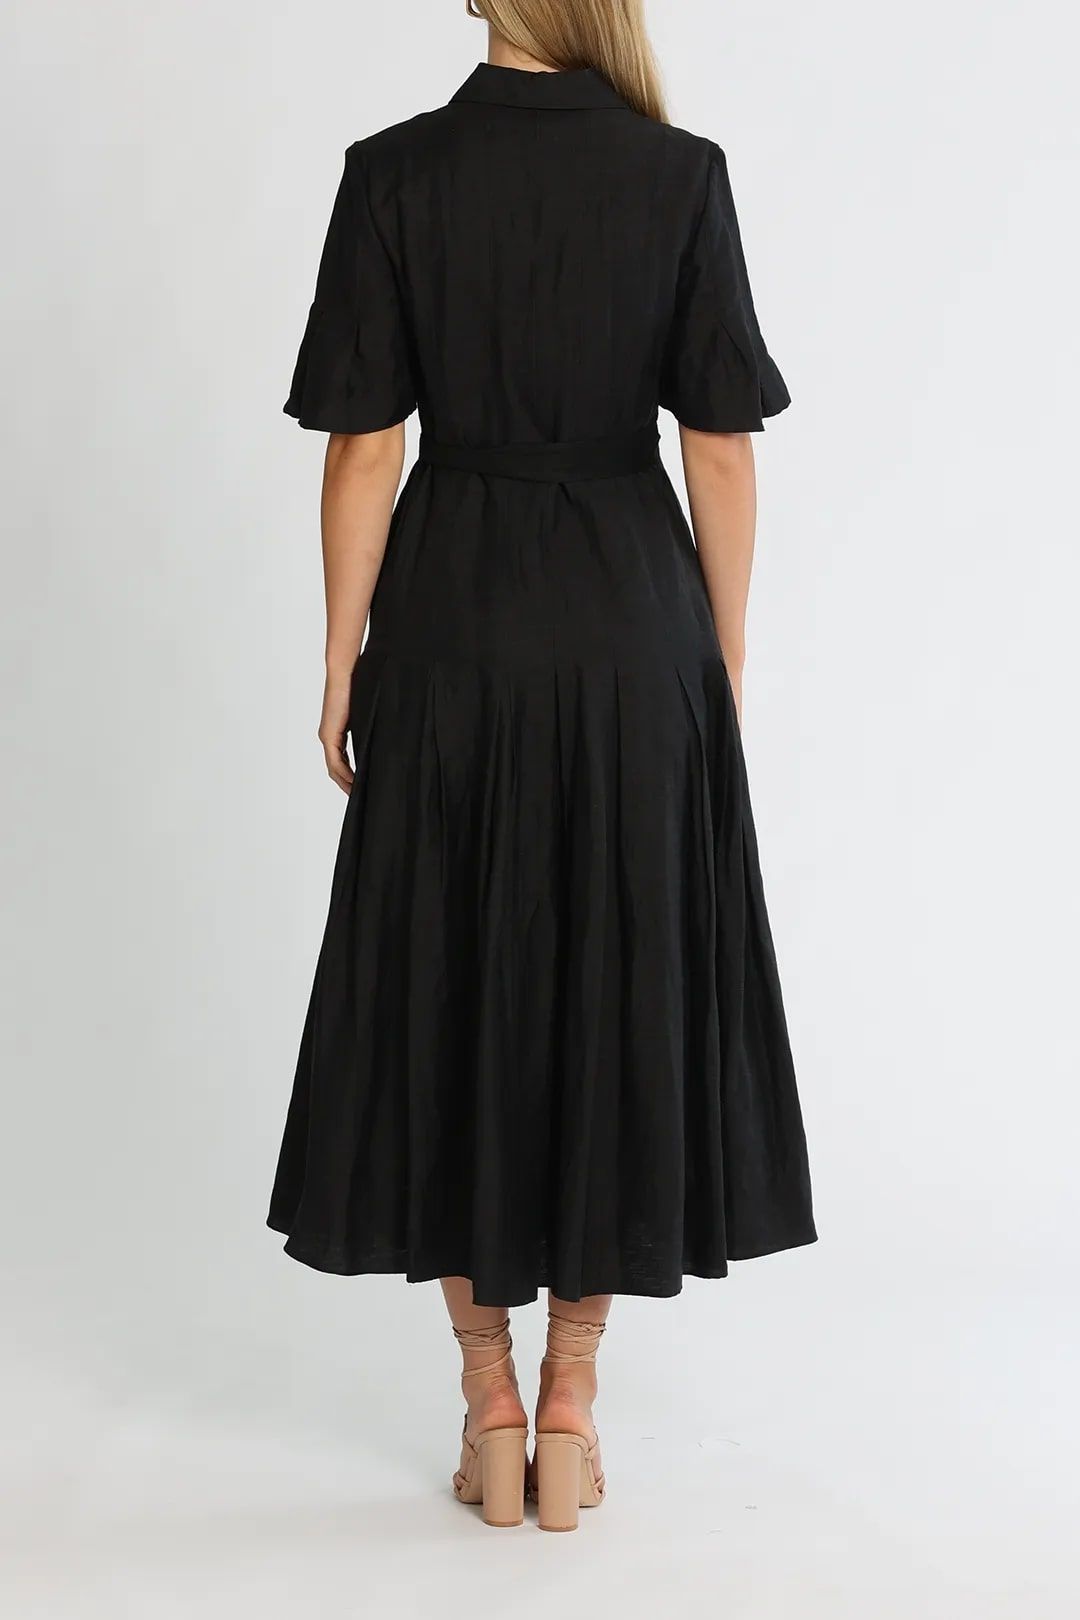 Lockwood dress in black for cocktail parties.